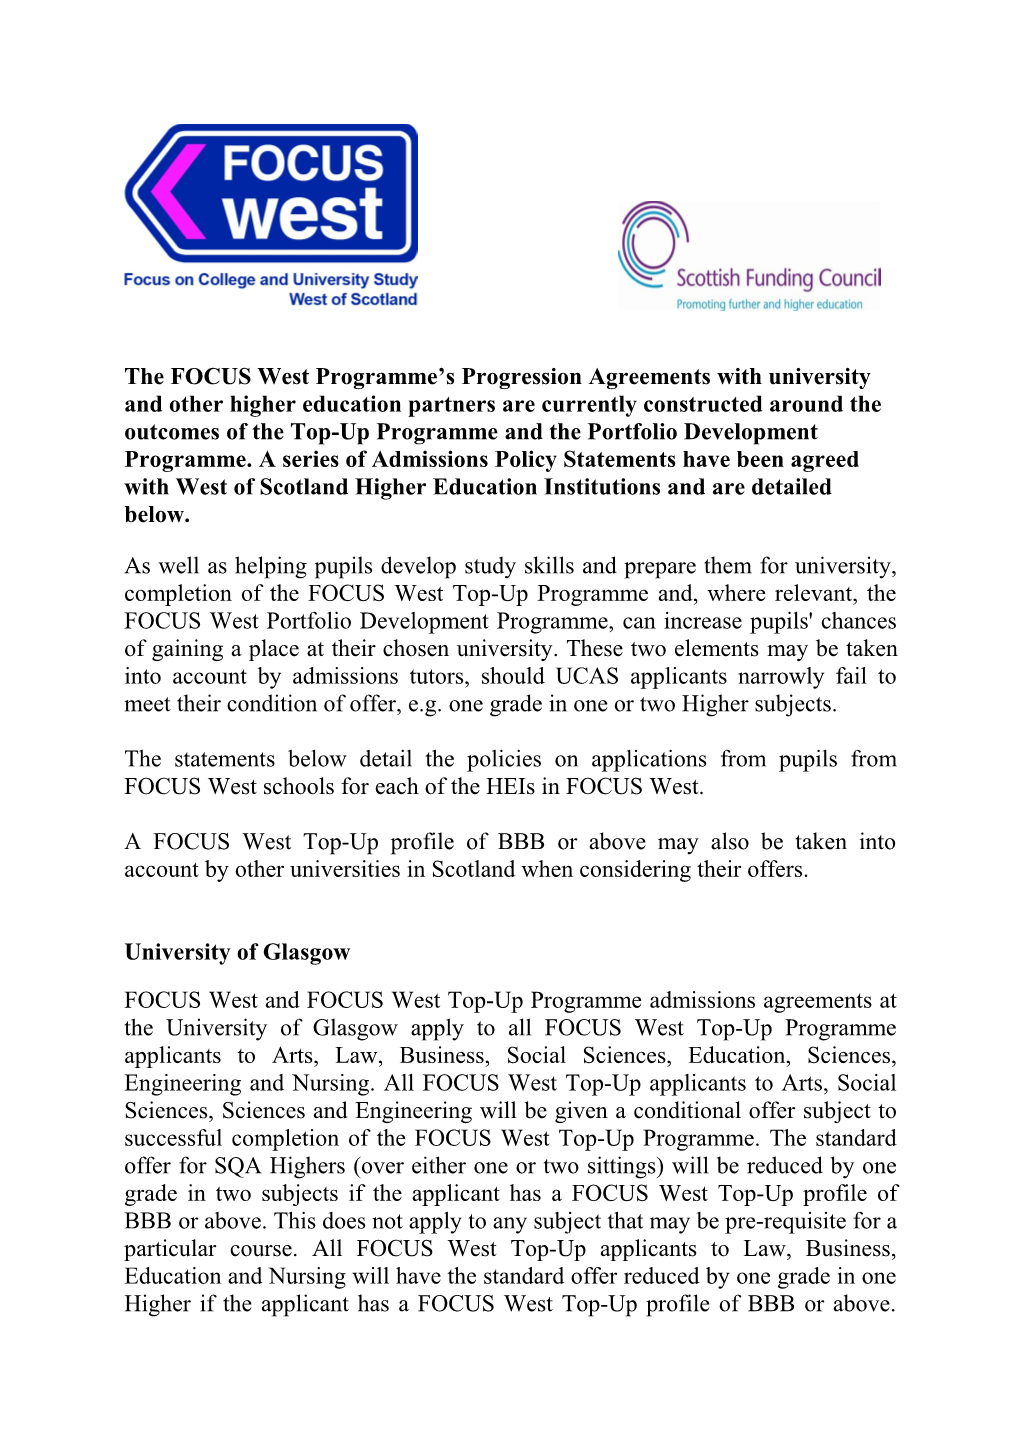 The FOCUS West Programme S Progression Agreements with University and Other Higher Education